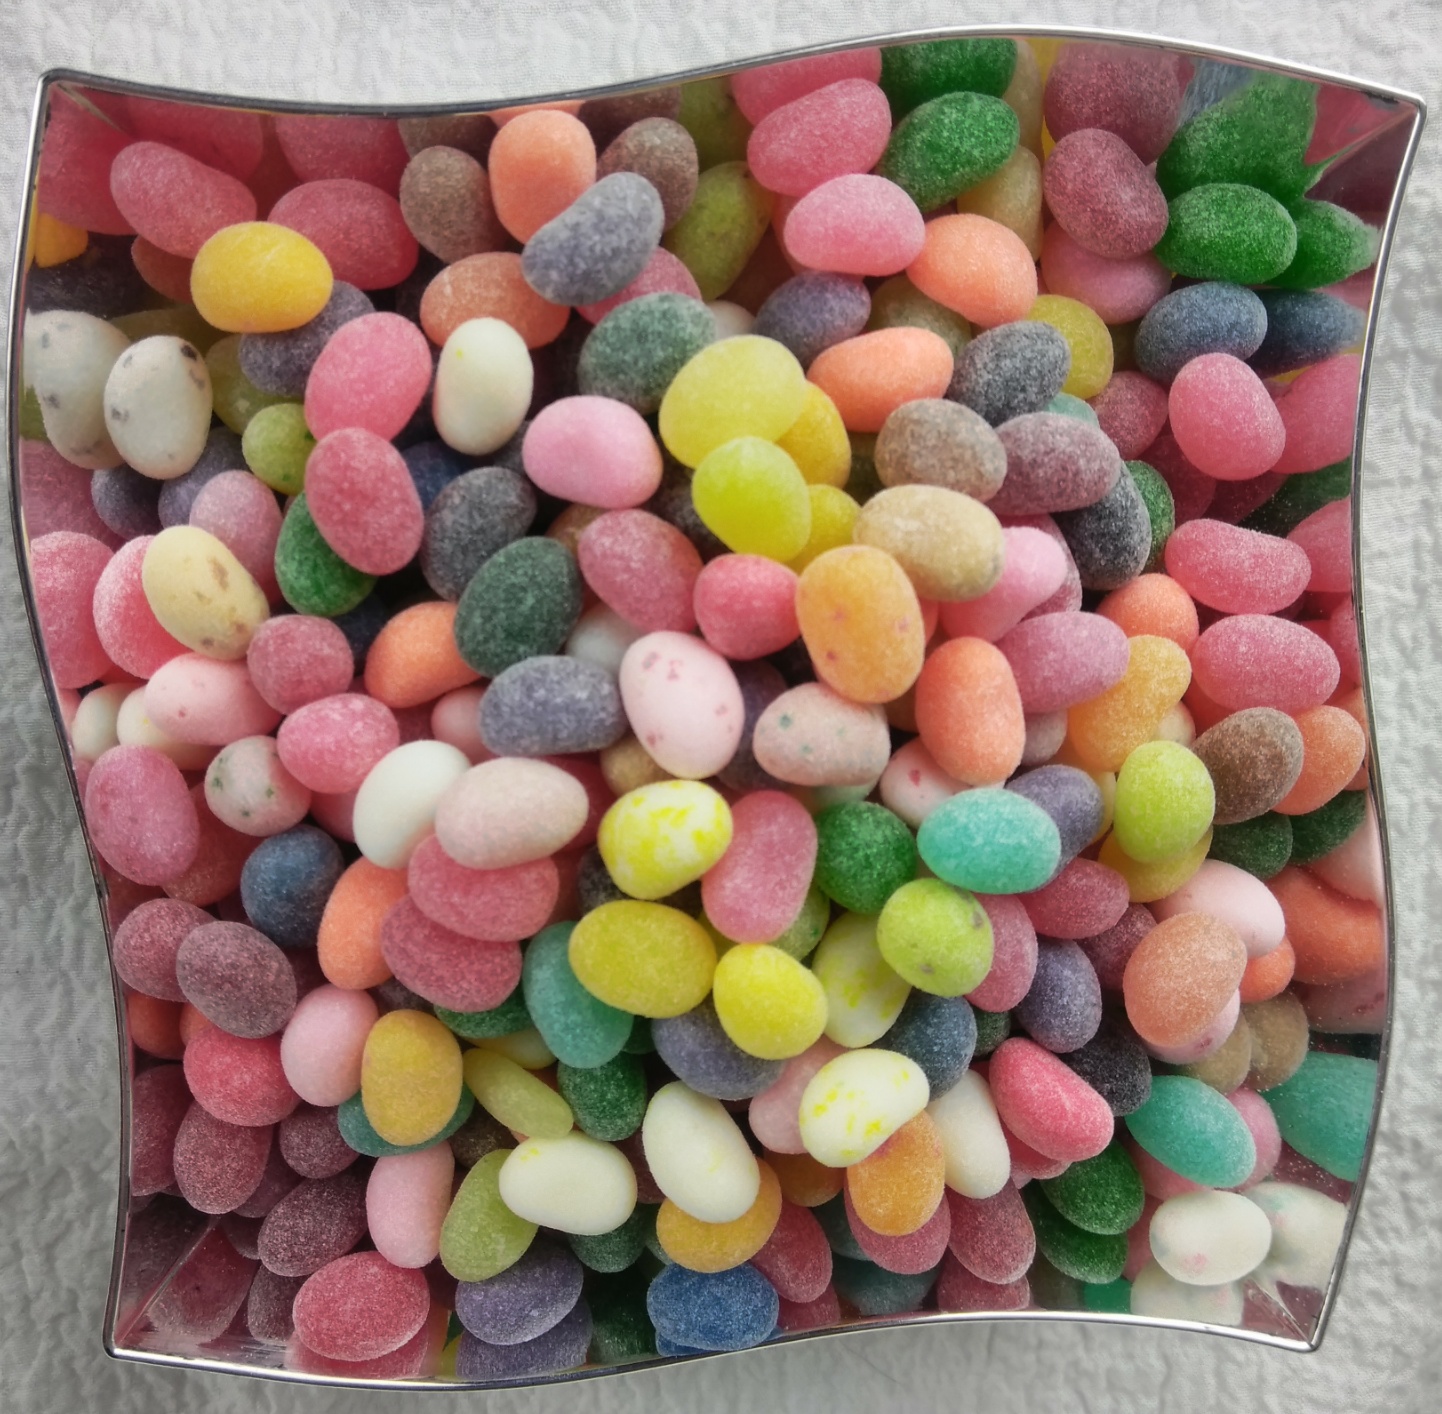 Creator of Jelly Belly Releases CBD-Infused Jelly Beans.